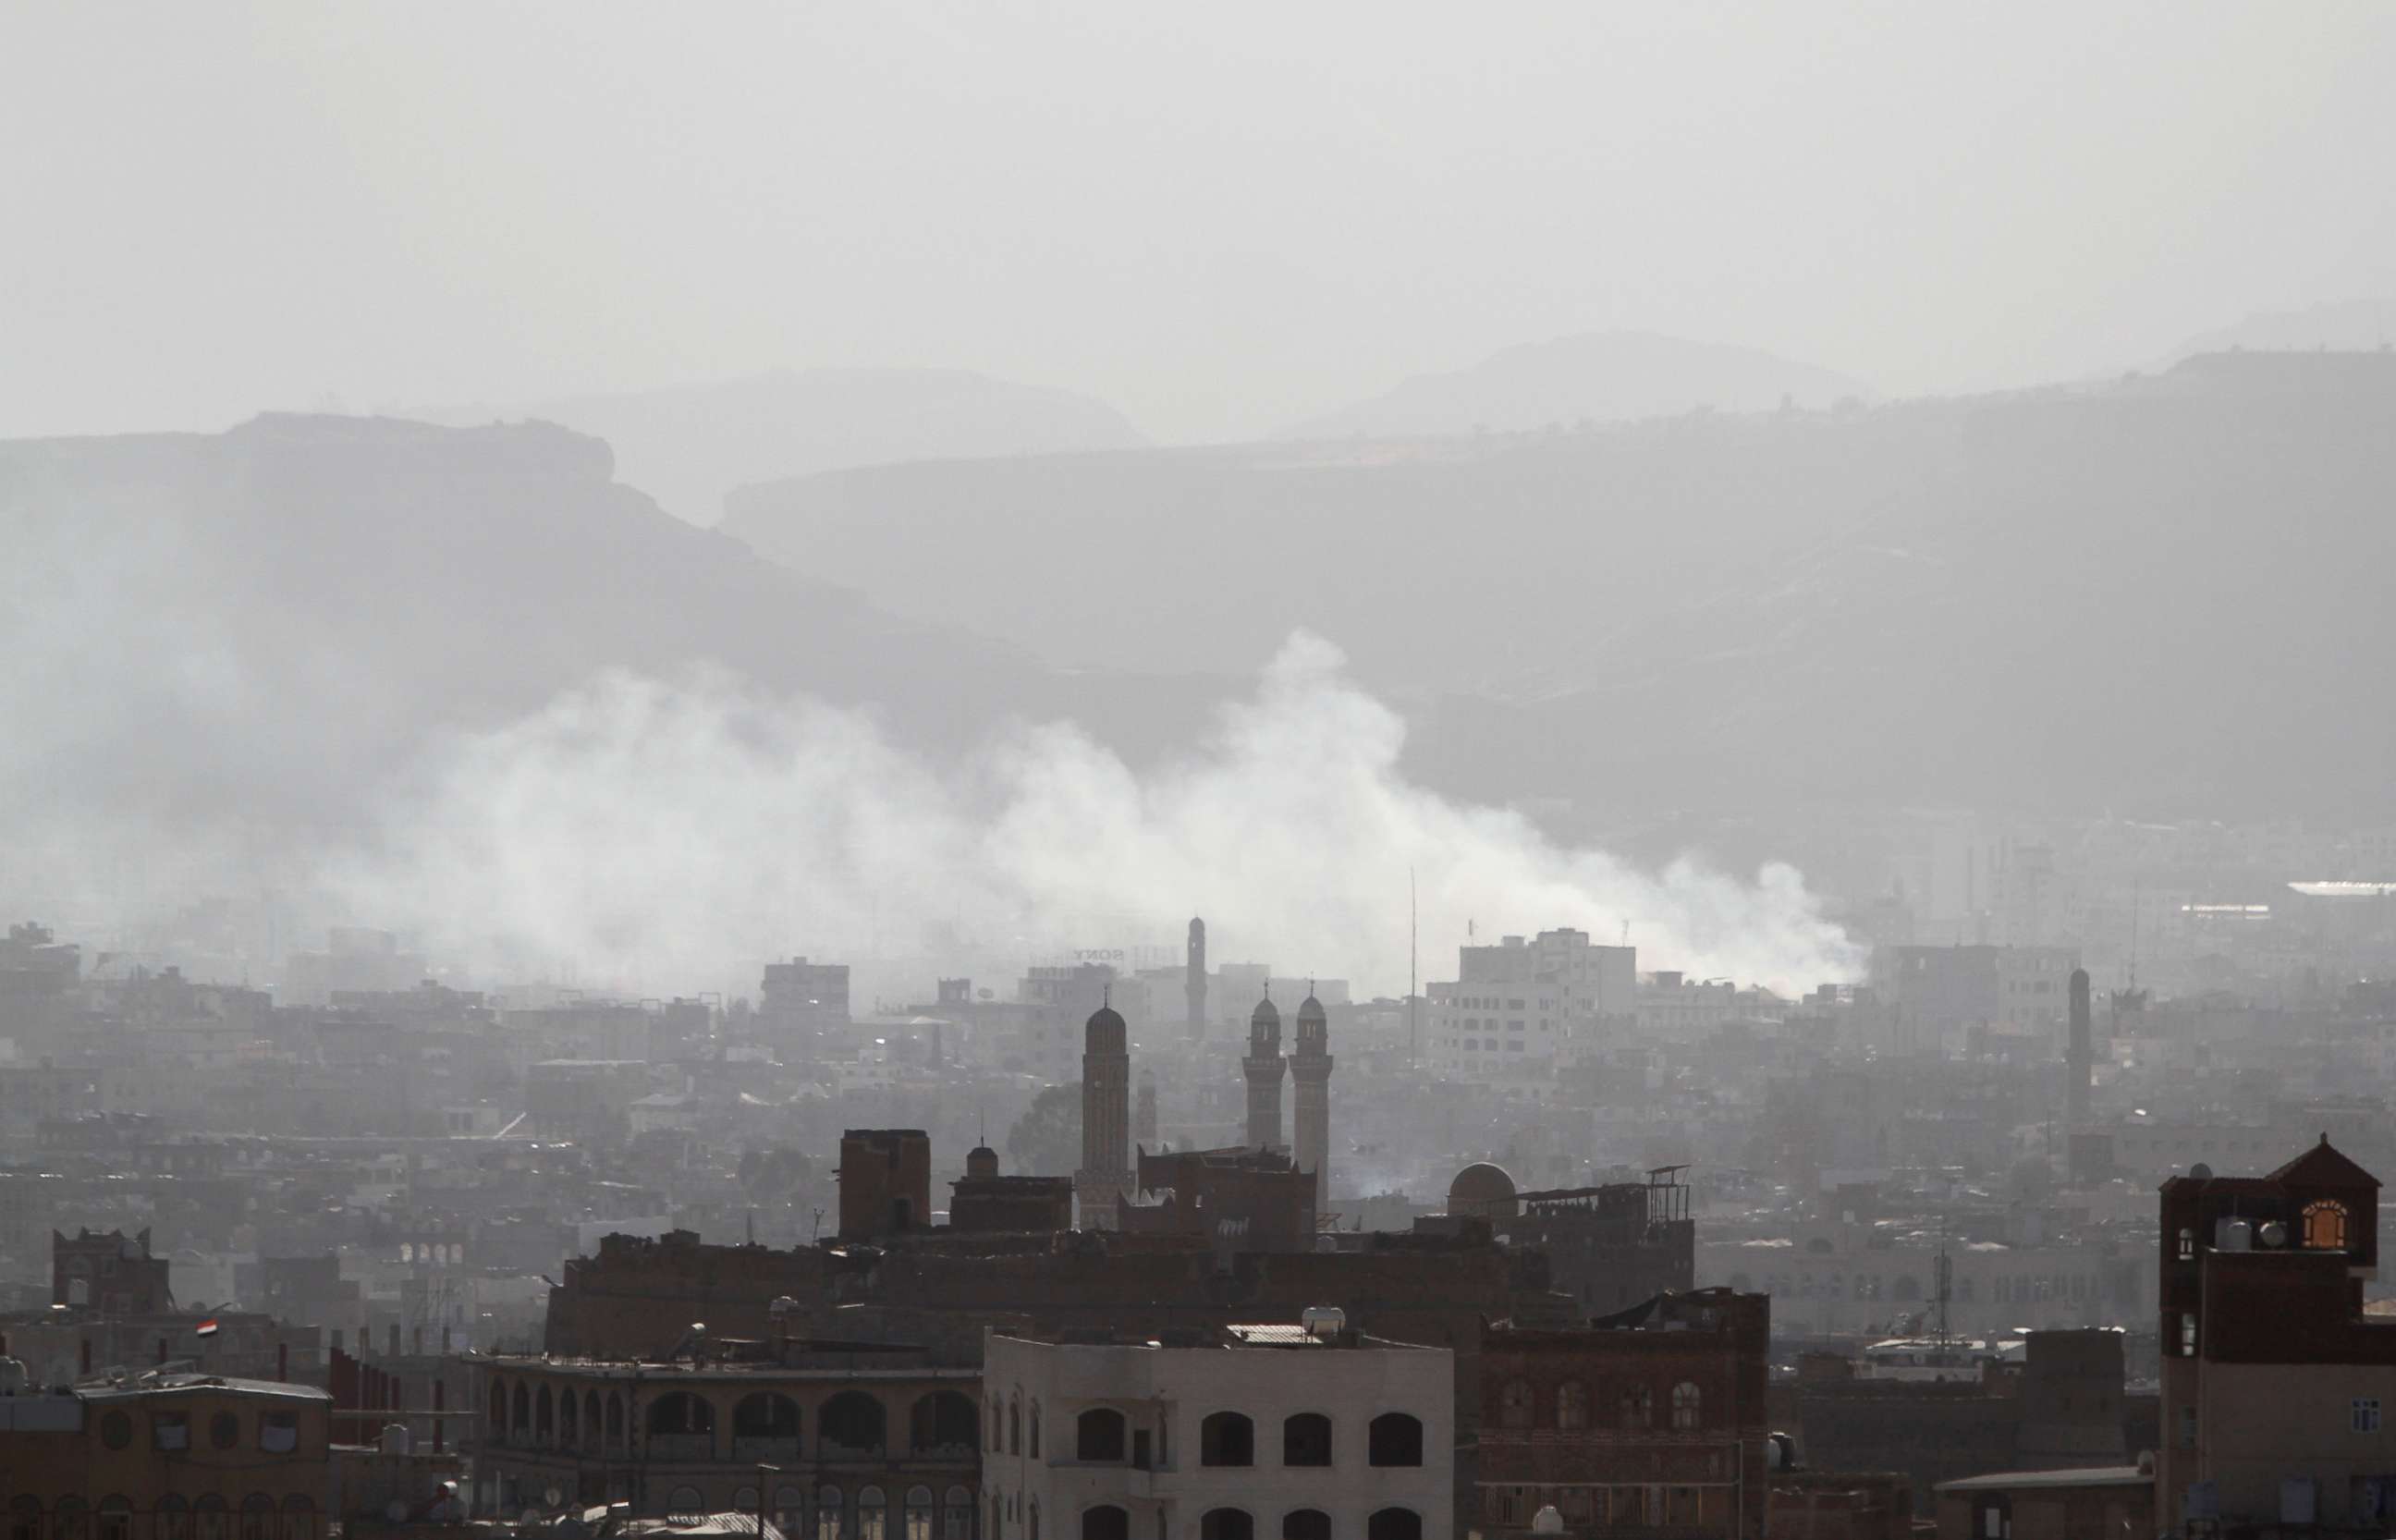 PHOTO: Smoke rises from areas where Houthi fighters clashed with forces loyal to Yemen's former president Ali Abdullah Saleh, who was killed, in Sanaa, Yemen Dec. 4, 2017.